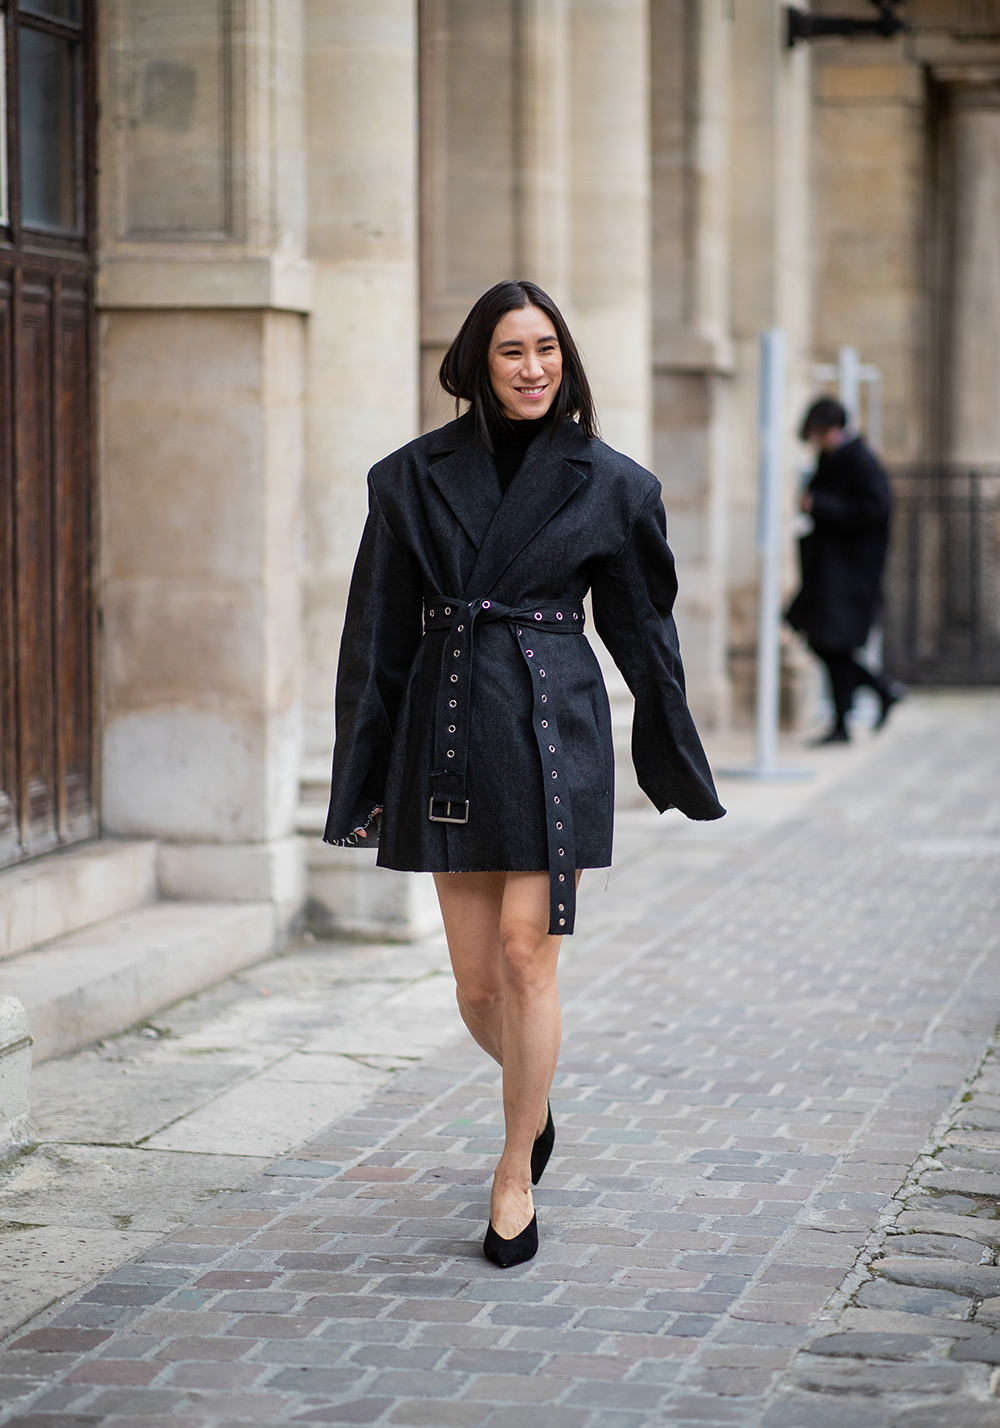 PARIS, FRANCE - MARCH 03: Eva Chen is seen wearing black belted coat outside Thom Browne during Paris Fashion Week Womenswear Fall/Winter 2019/2020 on March 03, 2019 in Paris, France. (Photo by Christian Vierig/Getty Images)